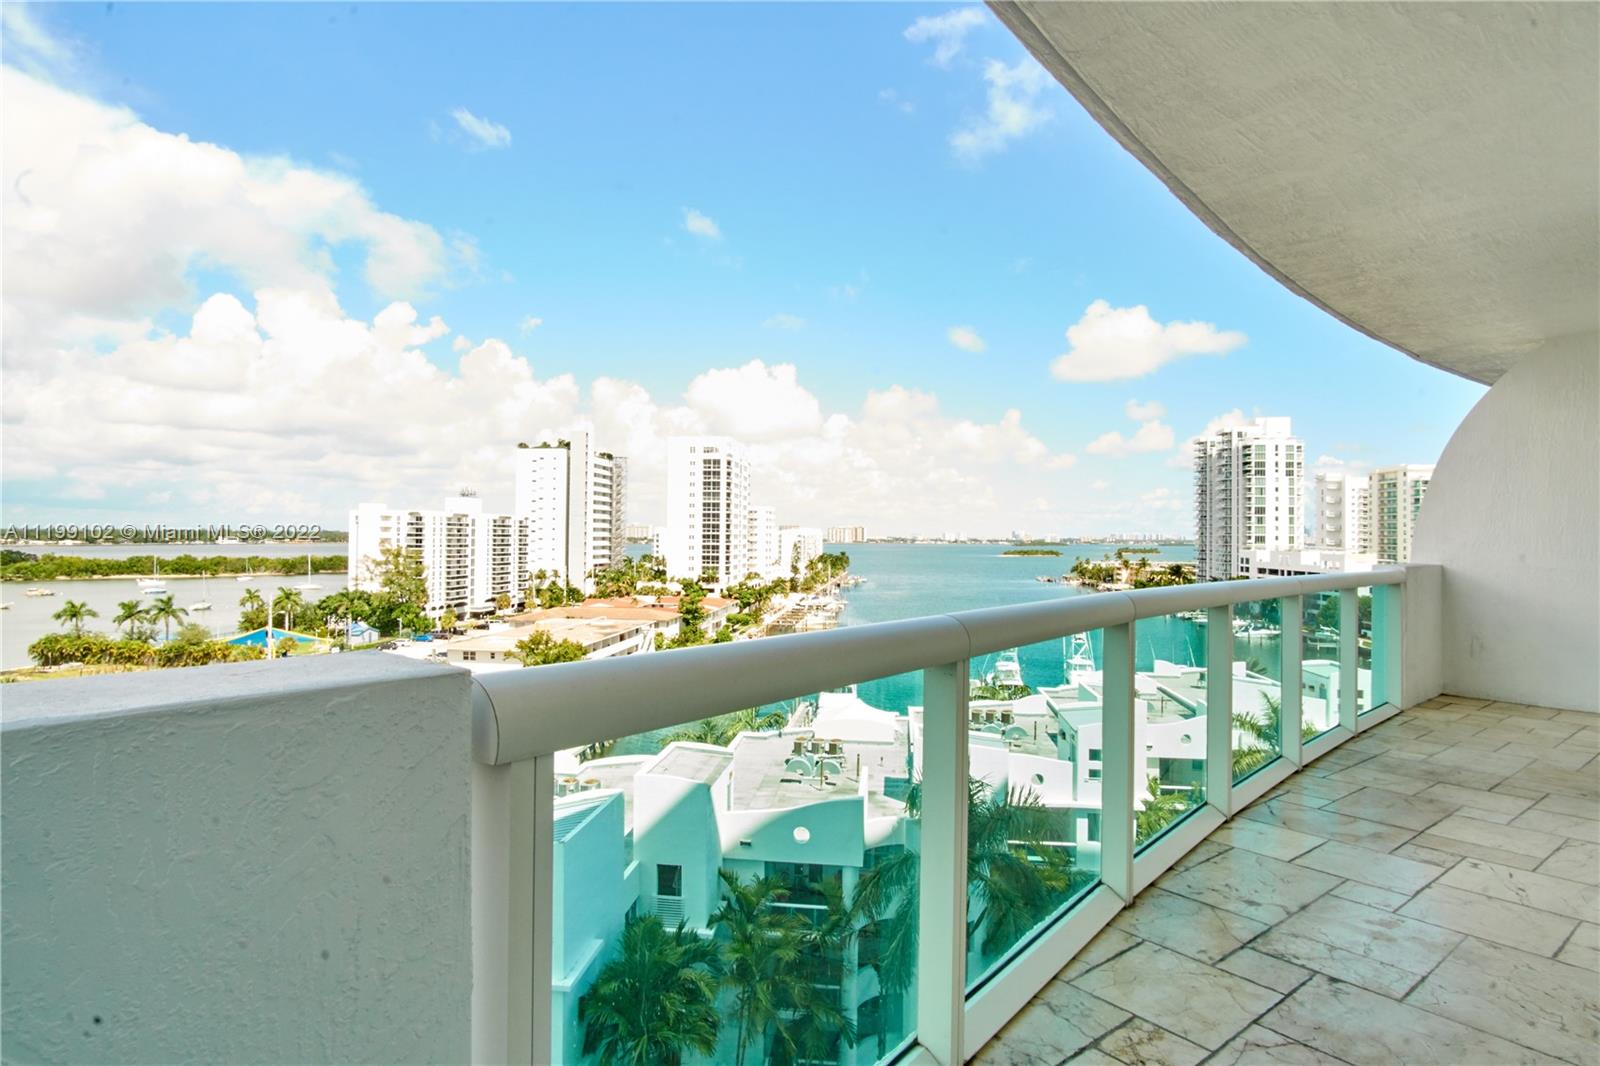 Impeccable 2 bed/ 2 bath split plan condo at 360 condominium in North bay village. A full service building offering 24hr concierge, 24hr gated security, gym, 2 pools, private marina and much more. Washer and dryer inside unit, large balcony, granite counter tops in kitchen with stainless steel appls. and tile throughout entire condo!! Water views from every room make this condo a must see! Easy to show it.